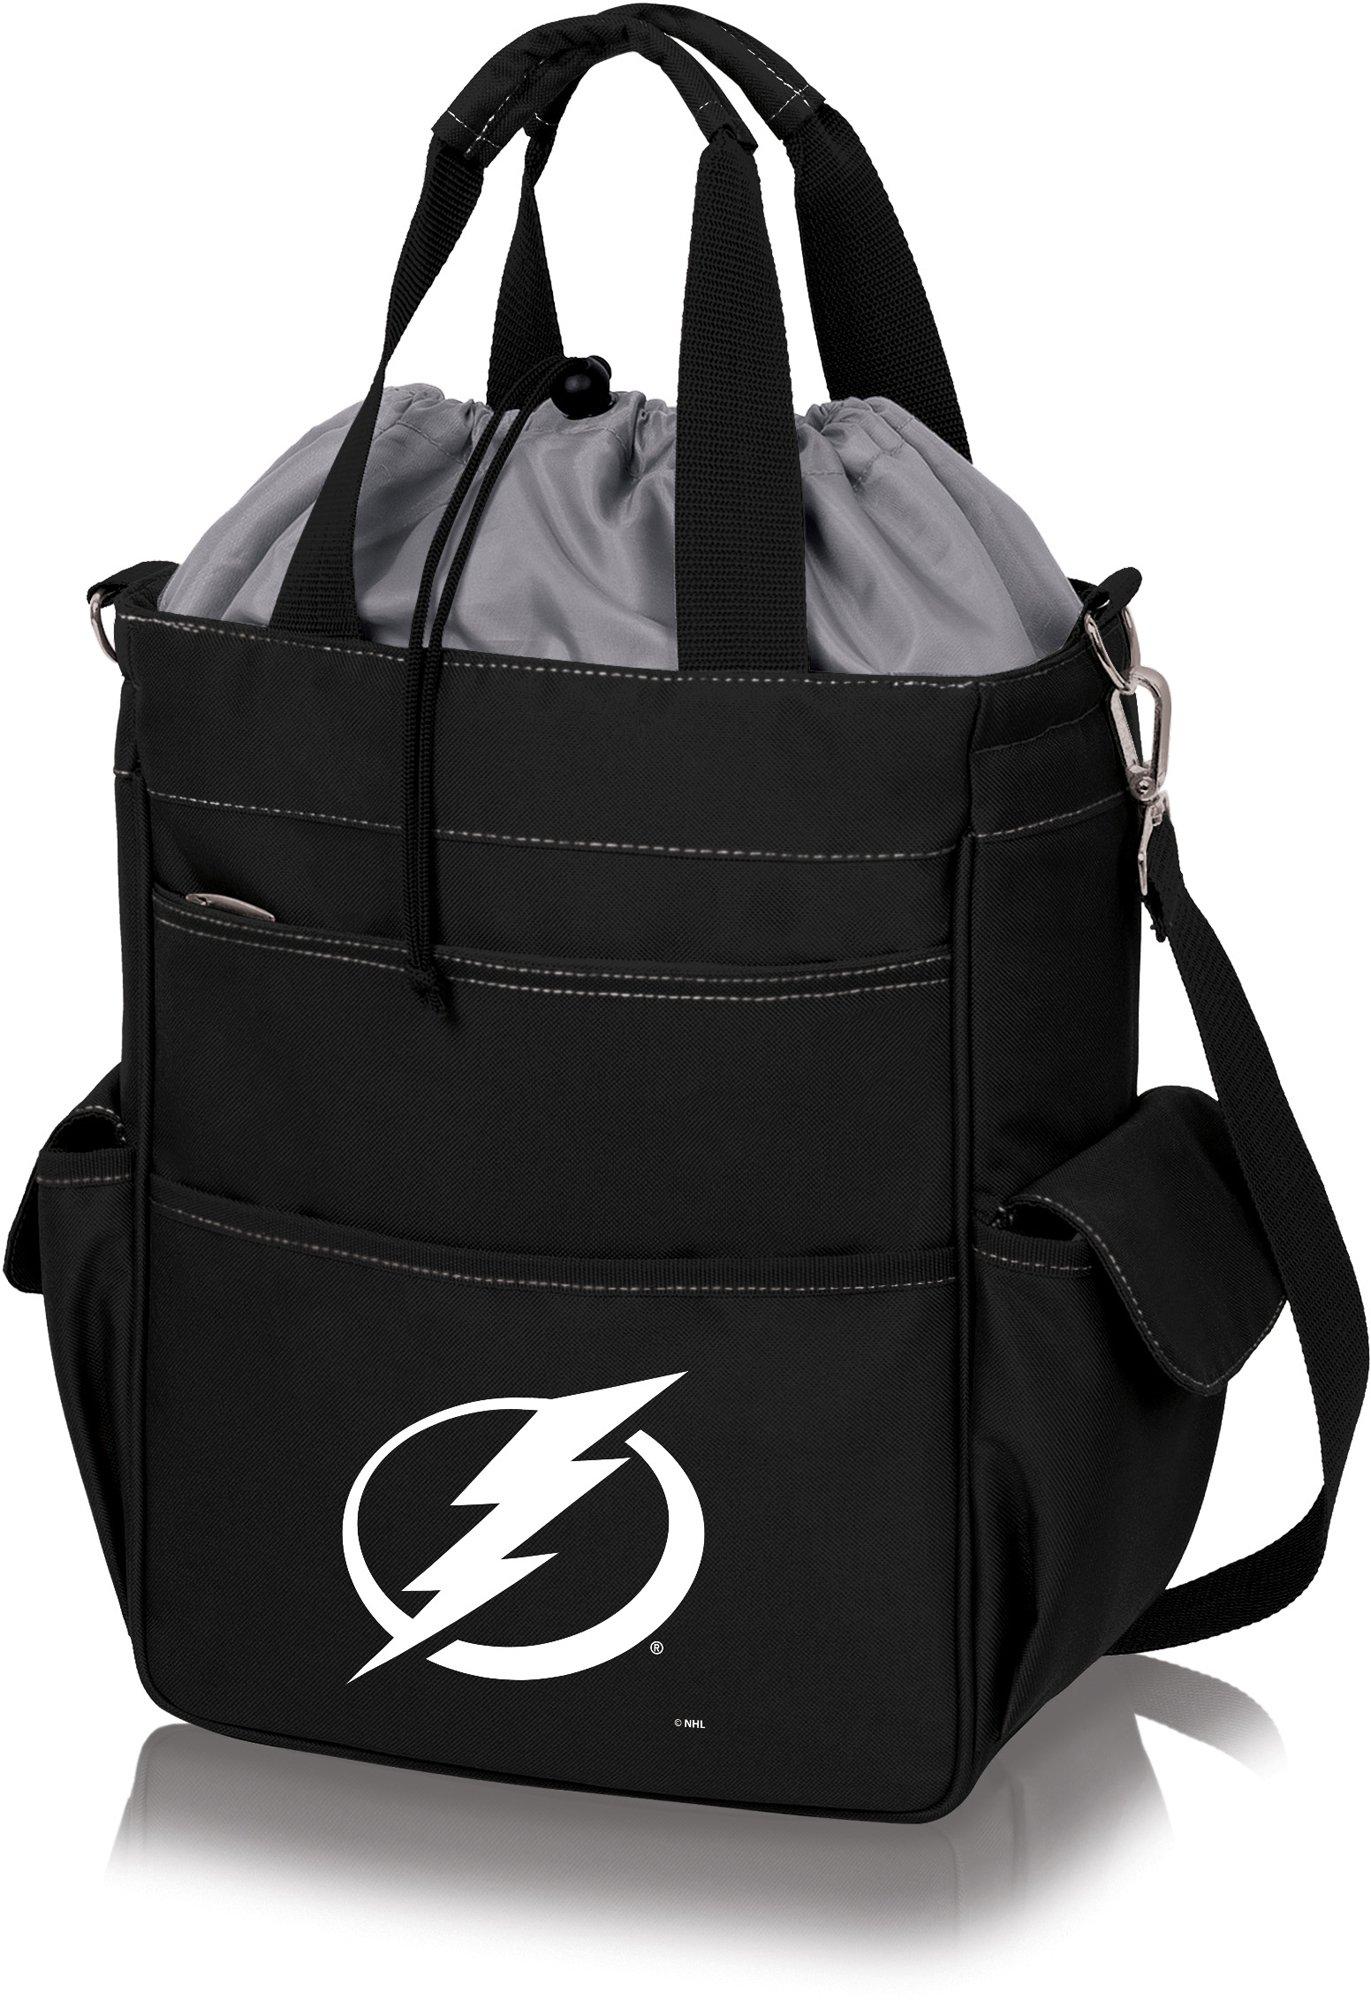 Tampa Bay Lightning Activo Cooler Tote by Oniva